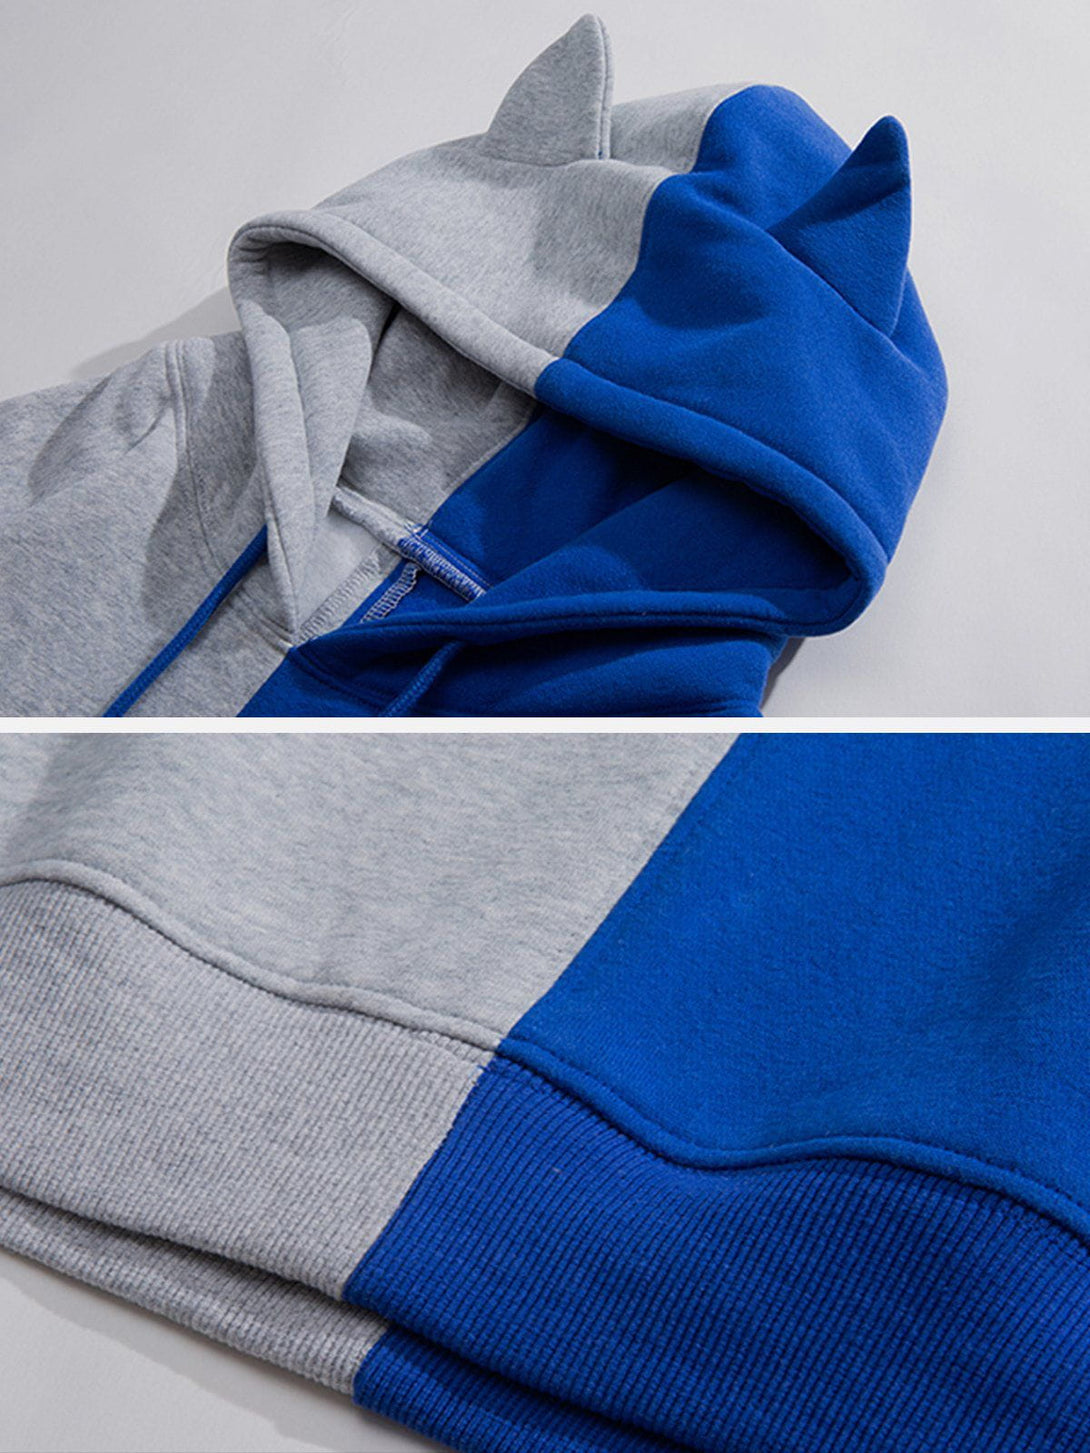 Levefly - Patchwork Clash Hoodie - Streetwear Fashion - levefly.com